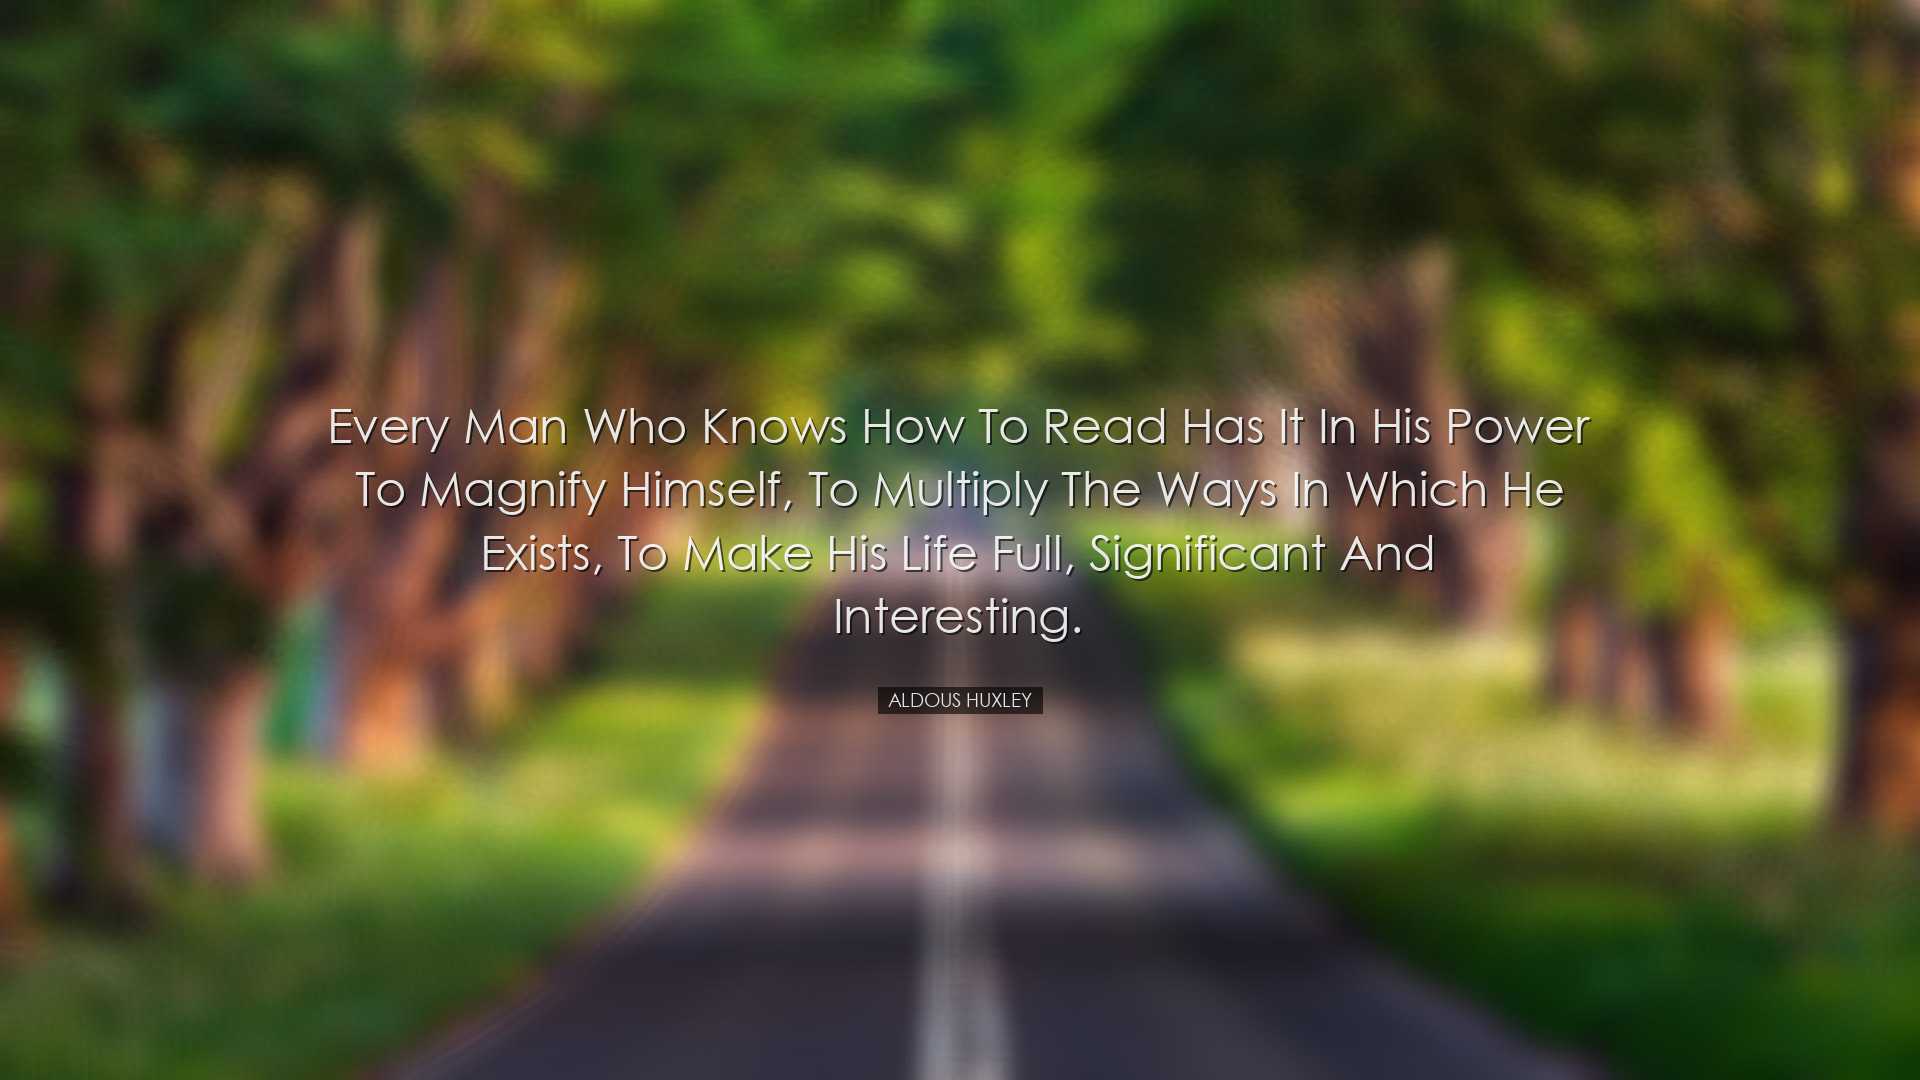 Every man who knows how to read has it in his power to magnify him